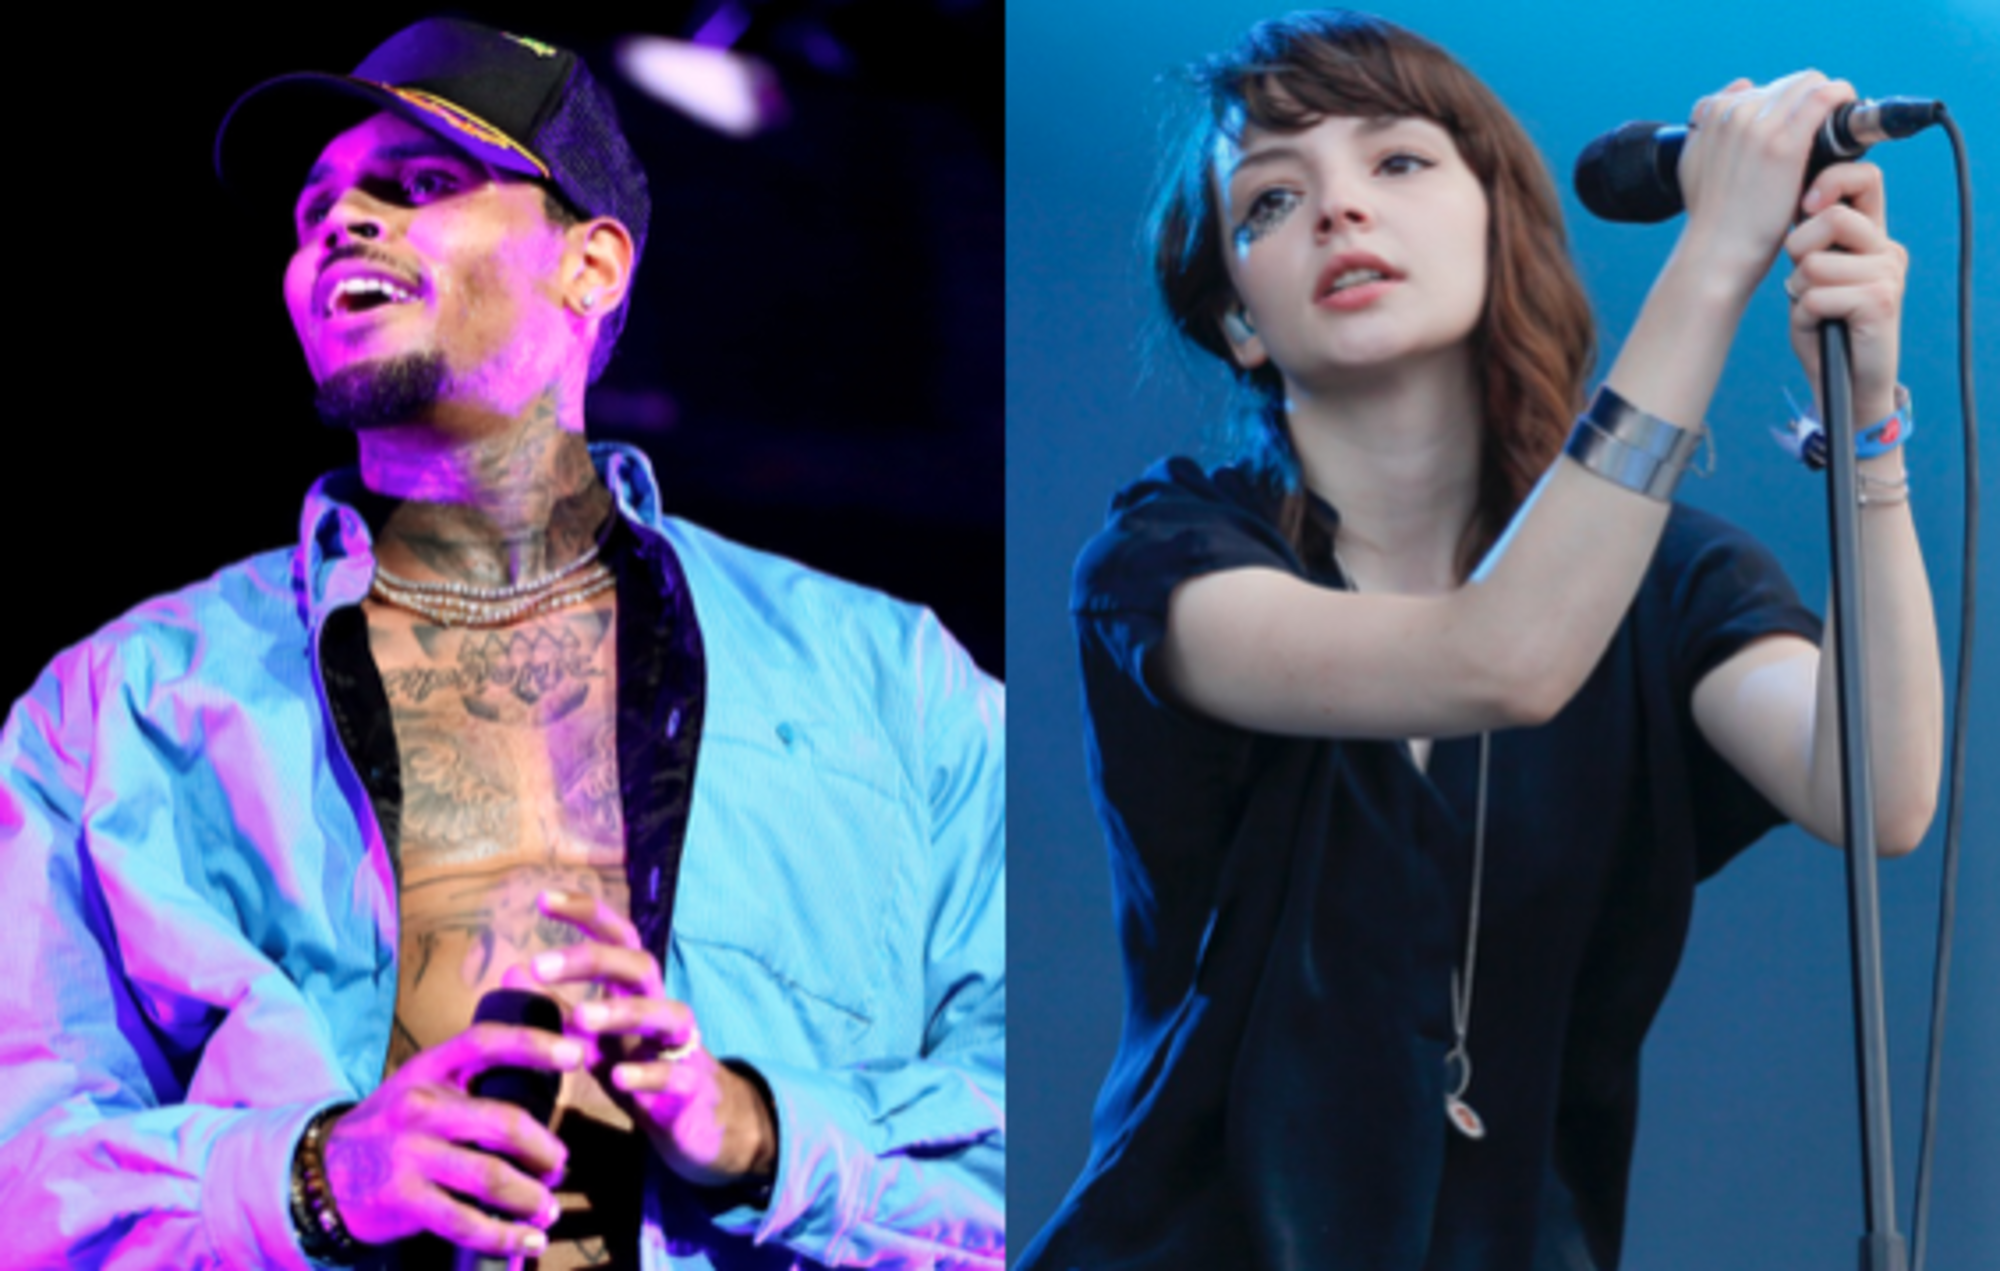 Chris Brown fires back at Chvrches following comments they made about him being an “abuser”